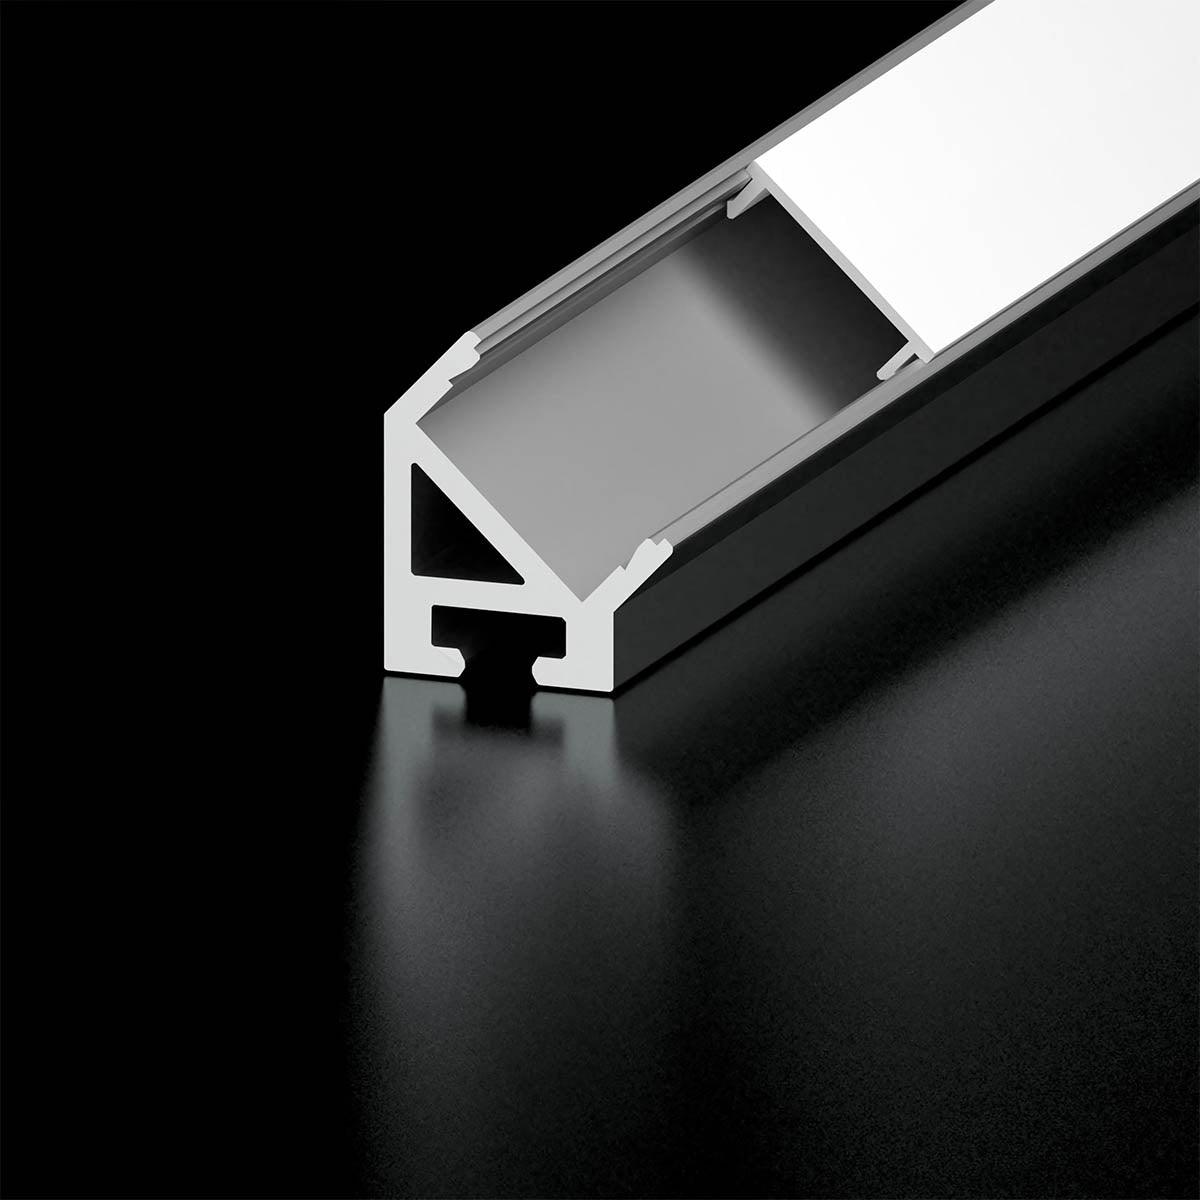 48in. Chromapath Builder, 45 degree LED channel, Corner, for Strips Up To 12mm, White